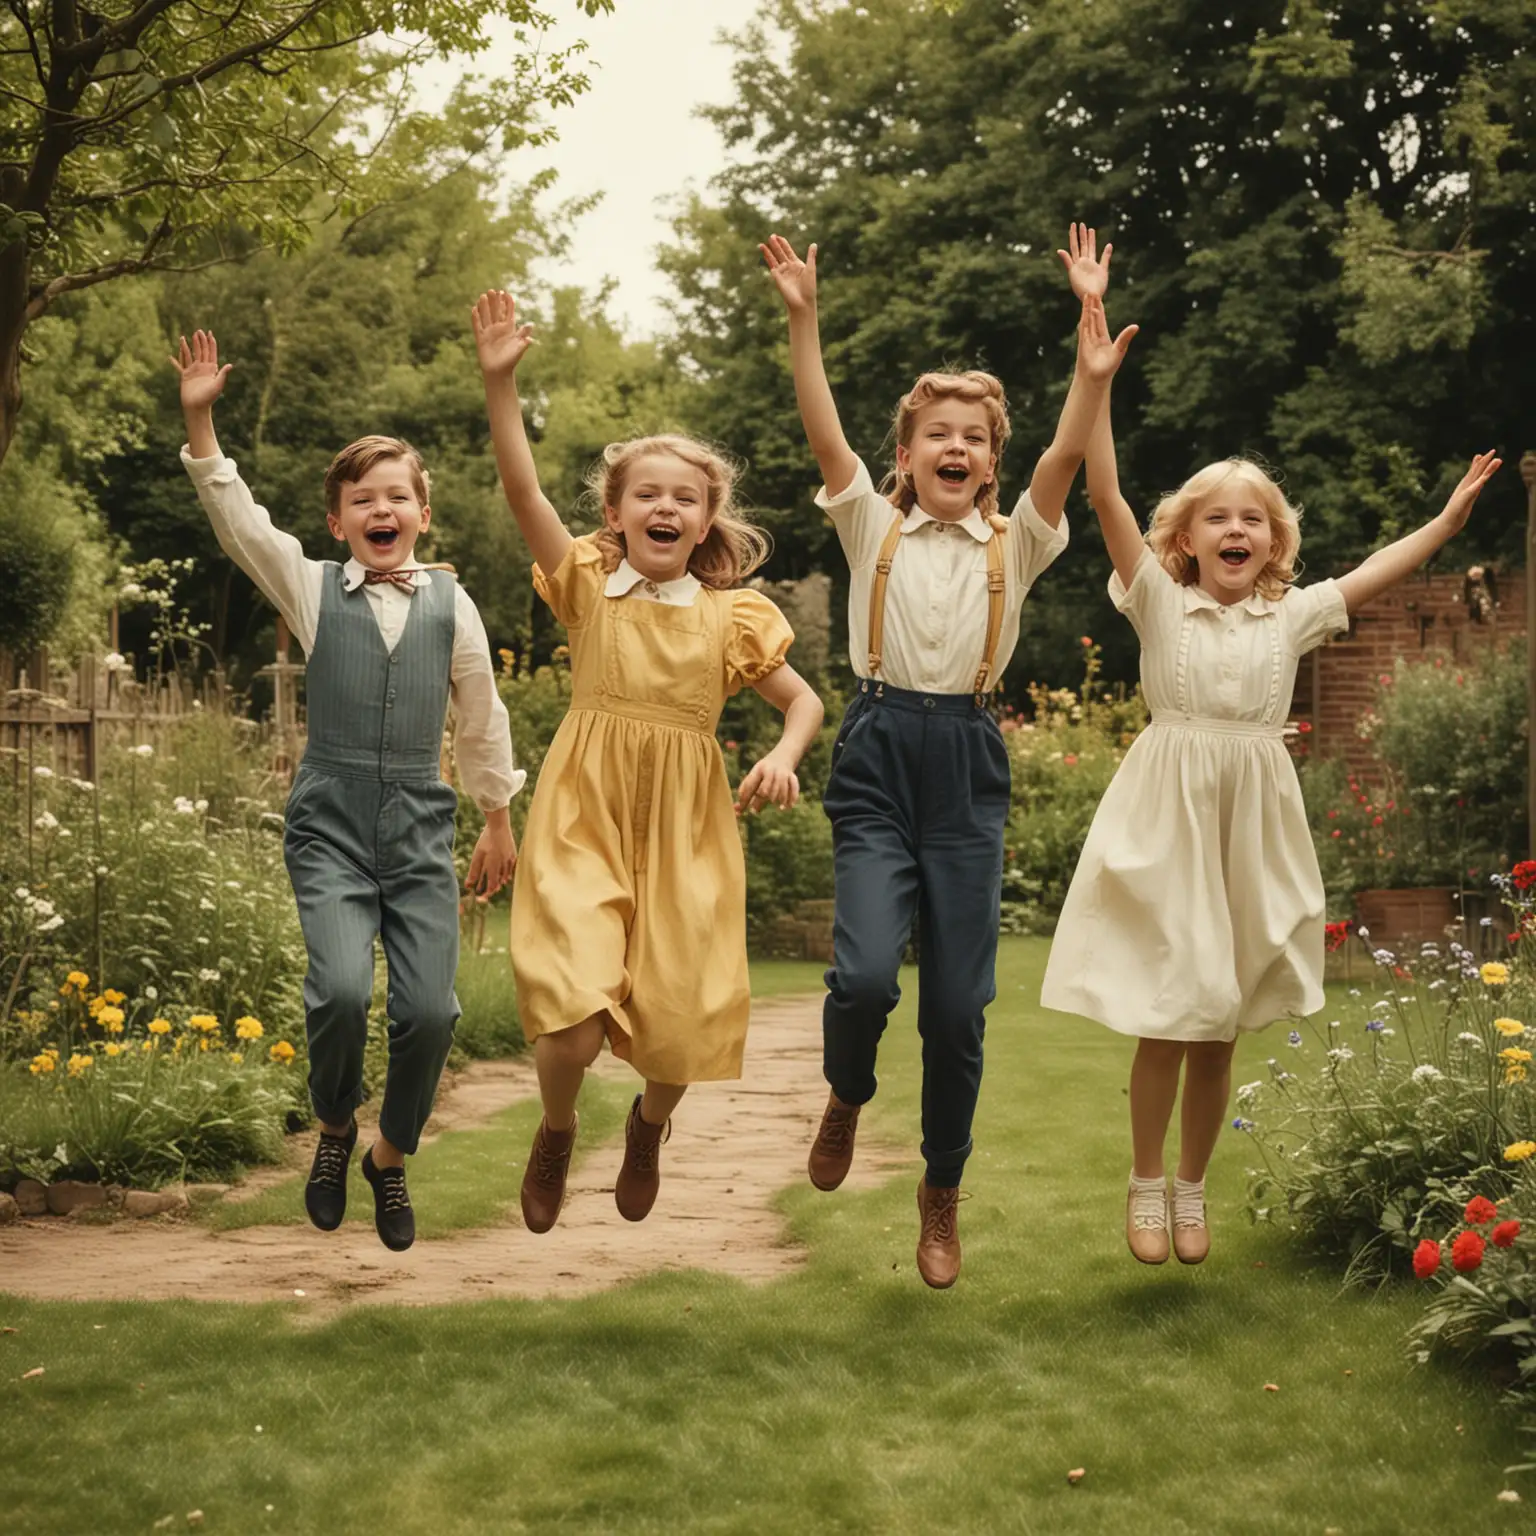 vintage boys and girls jumping and dancing with there hands waving around in a garden